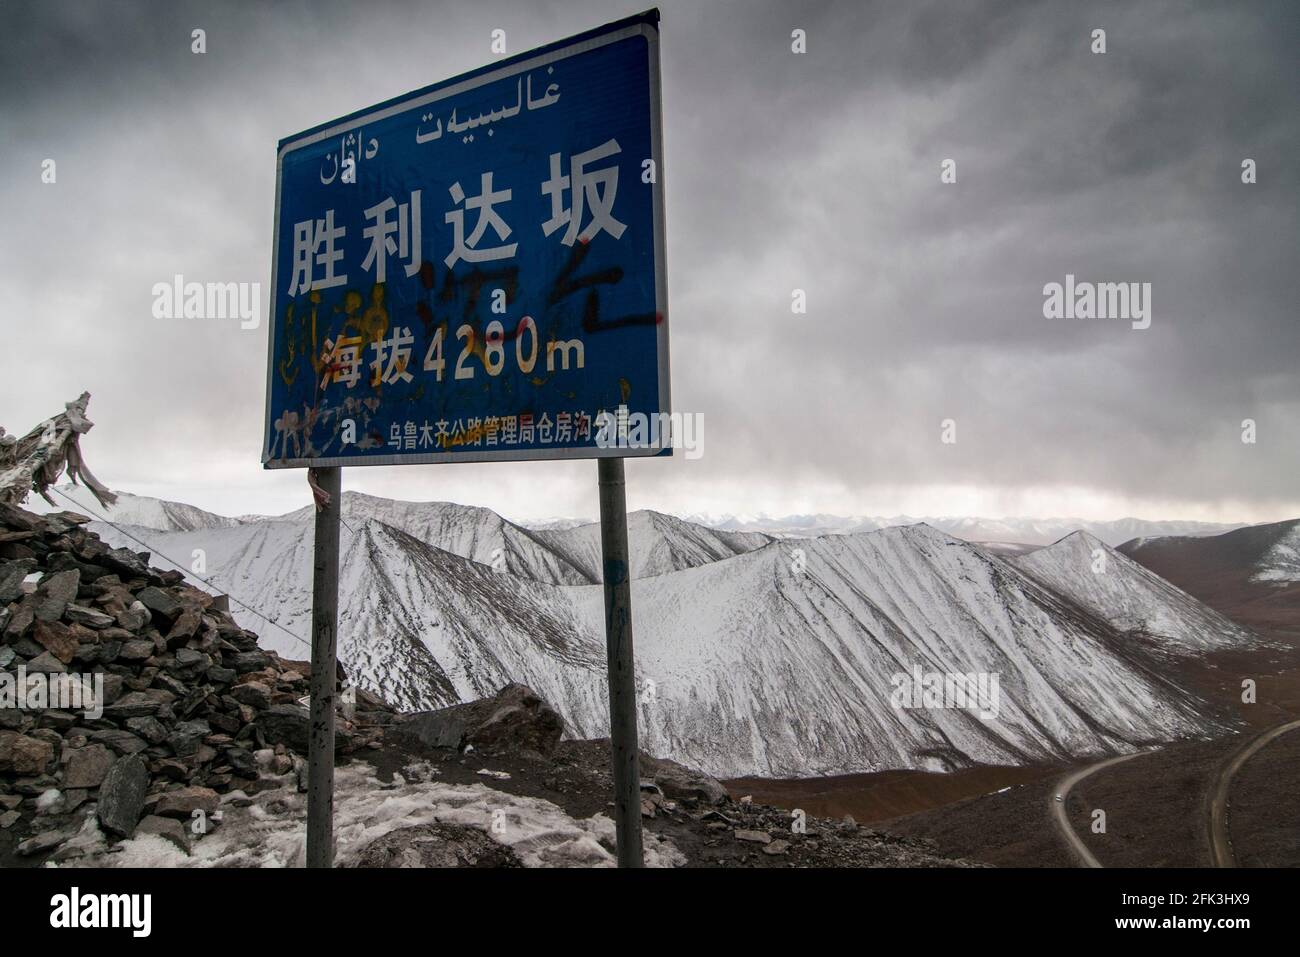 A cold weather front moves across the 4260m high pass of the G216 Highway connecting Urumuqi to the Bayingolin Prefecture across the Tianshan mountains in Xinjiang, China, PRC. © Time-Snaps Stock Photo